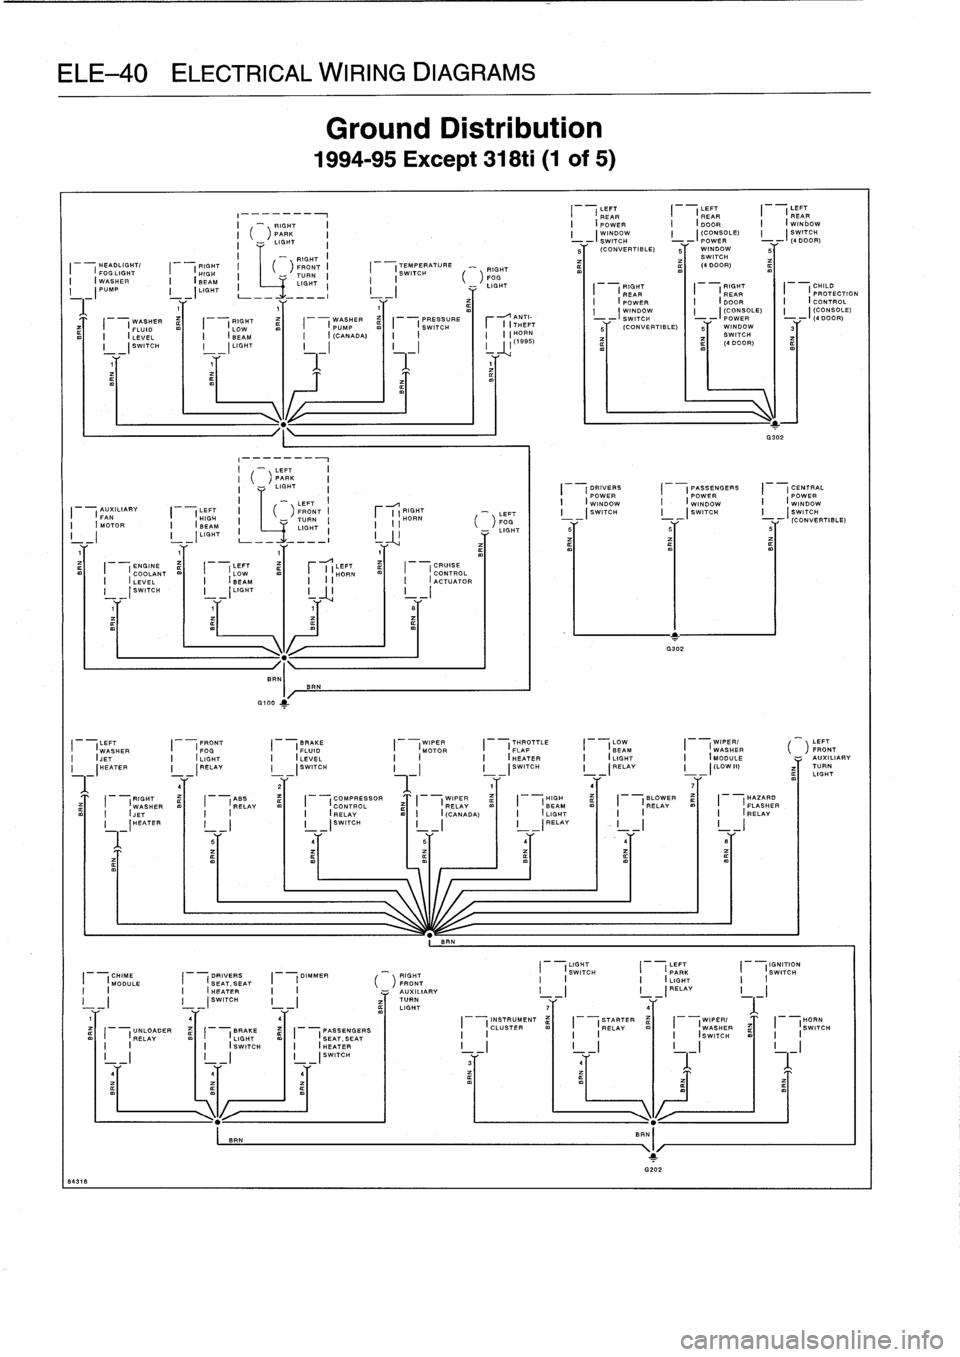 BMW 318i 1997 E36 Workshop Manual 
ELE-40
ELECTRICAL
WIRING
DIAGRAMS

RIGHTHEADLIGHT/

	

RIGHT
I

	

FRONT
I

	

FOG
LIGHT

	

I

	

HIGH

	

I

	

TURN
I

	

I
WASHER

	

I

	

I
BEAM

	

LIGHT
I
(PUMP

	

I
(LIGHT
,
L-
1

	

1

	

